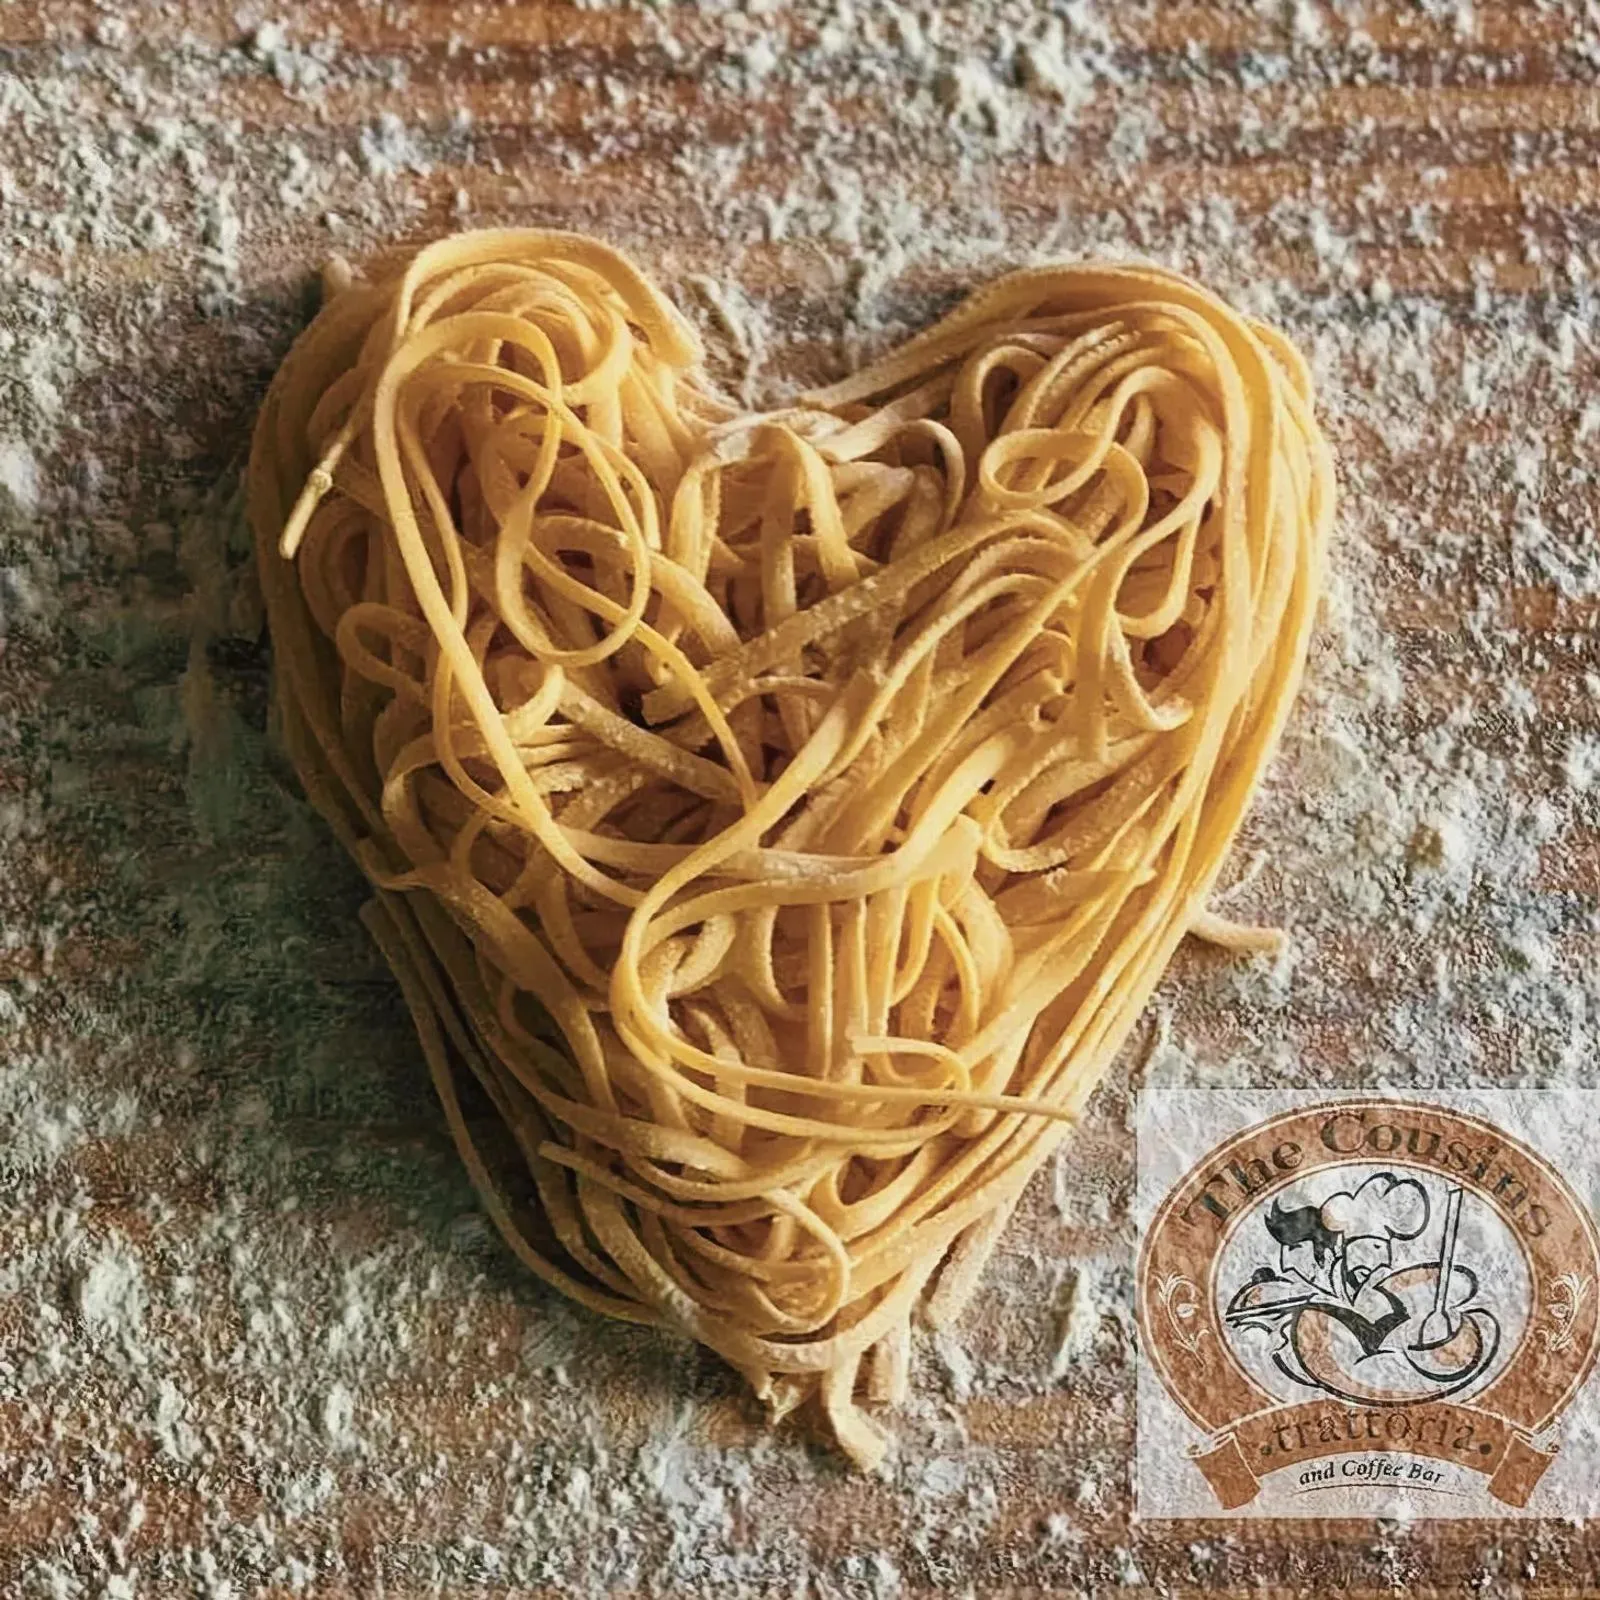 Heart-shaped pasta dish on a wooden table